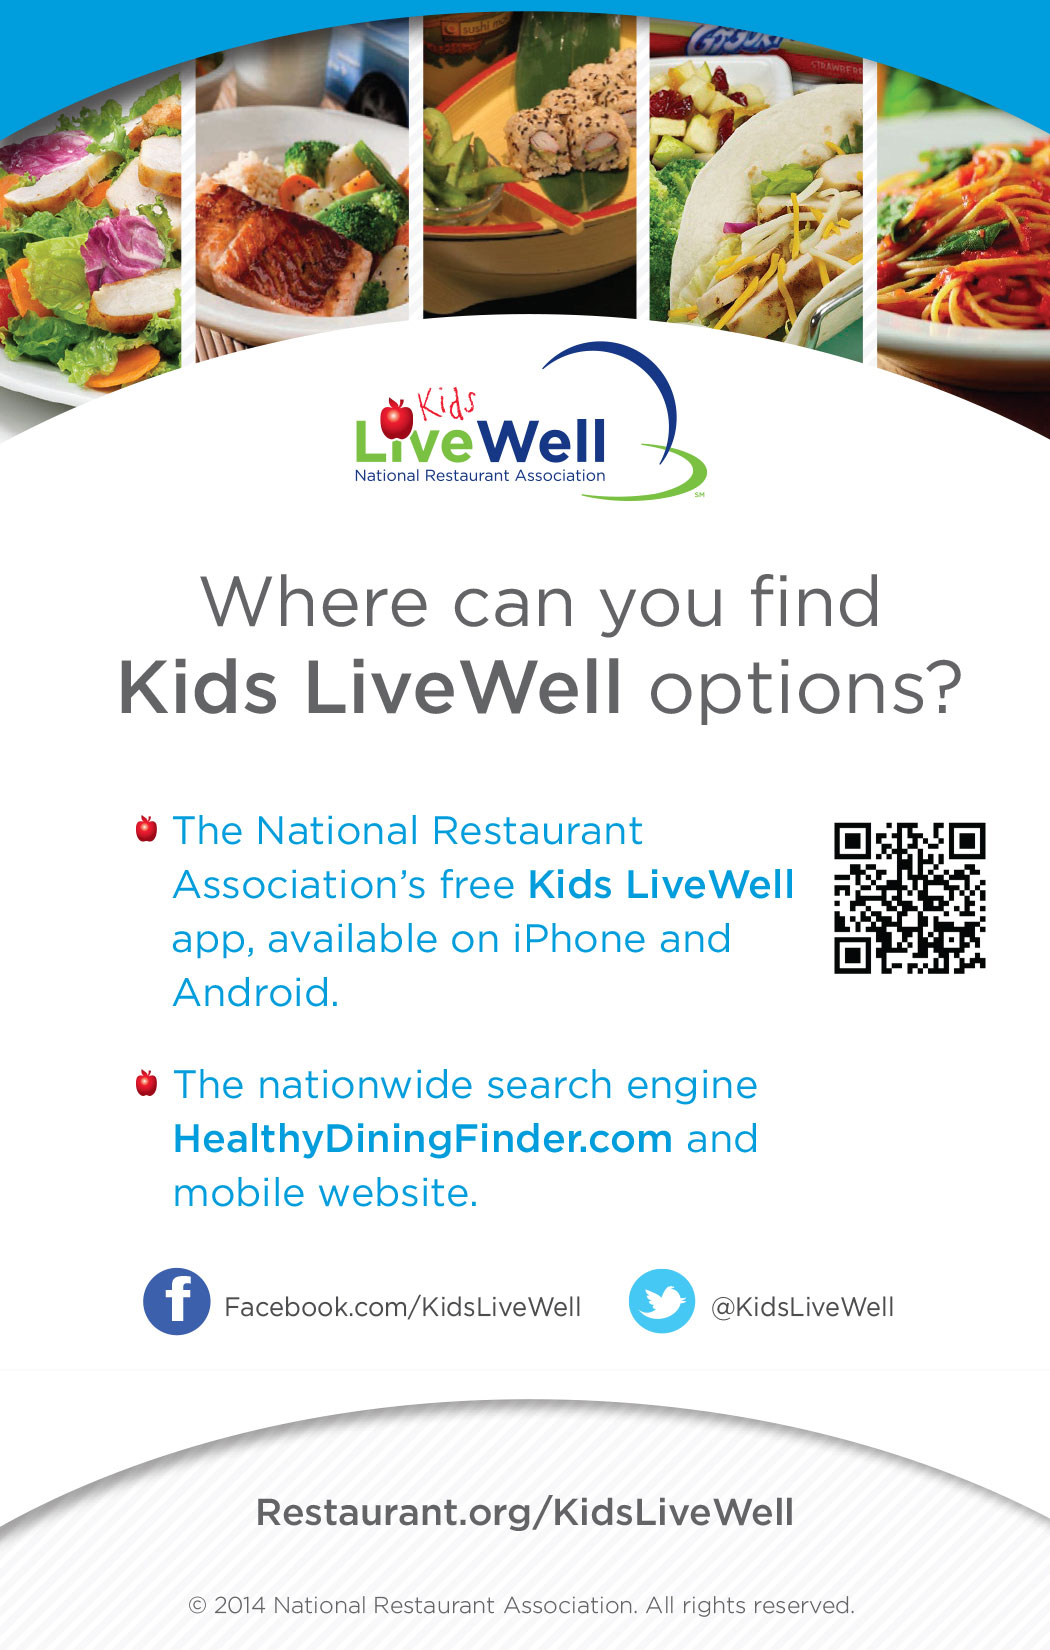 The Kids LiveWell program reaches over 42,000 restaurant locations committed to providing families with a growing selection of healthful children-s menu choices when dining out.